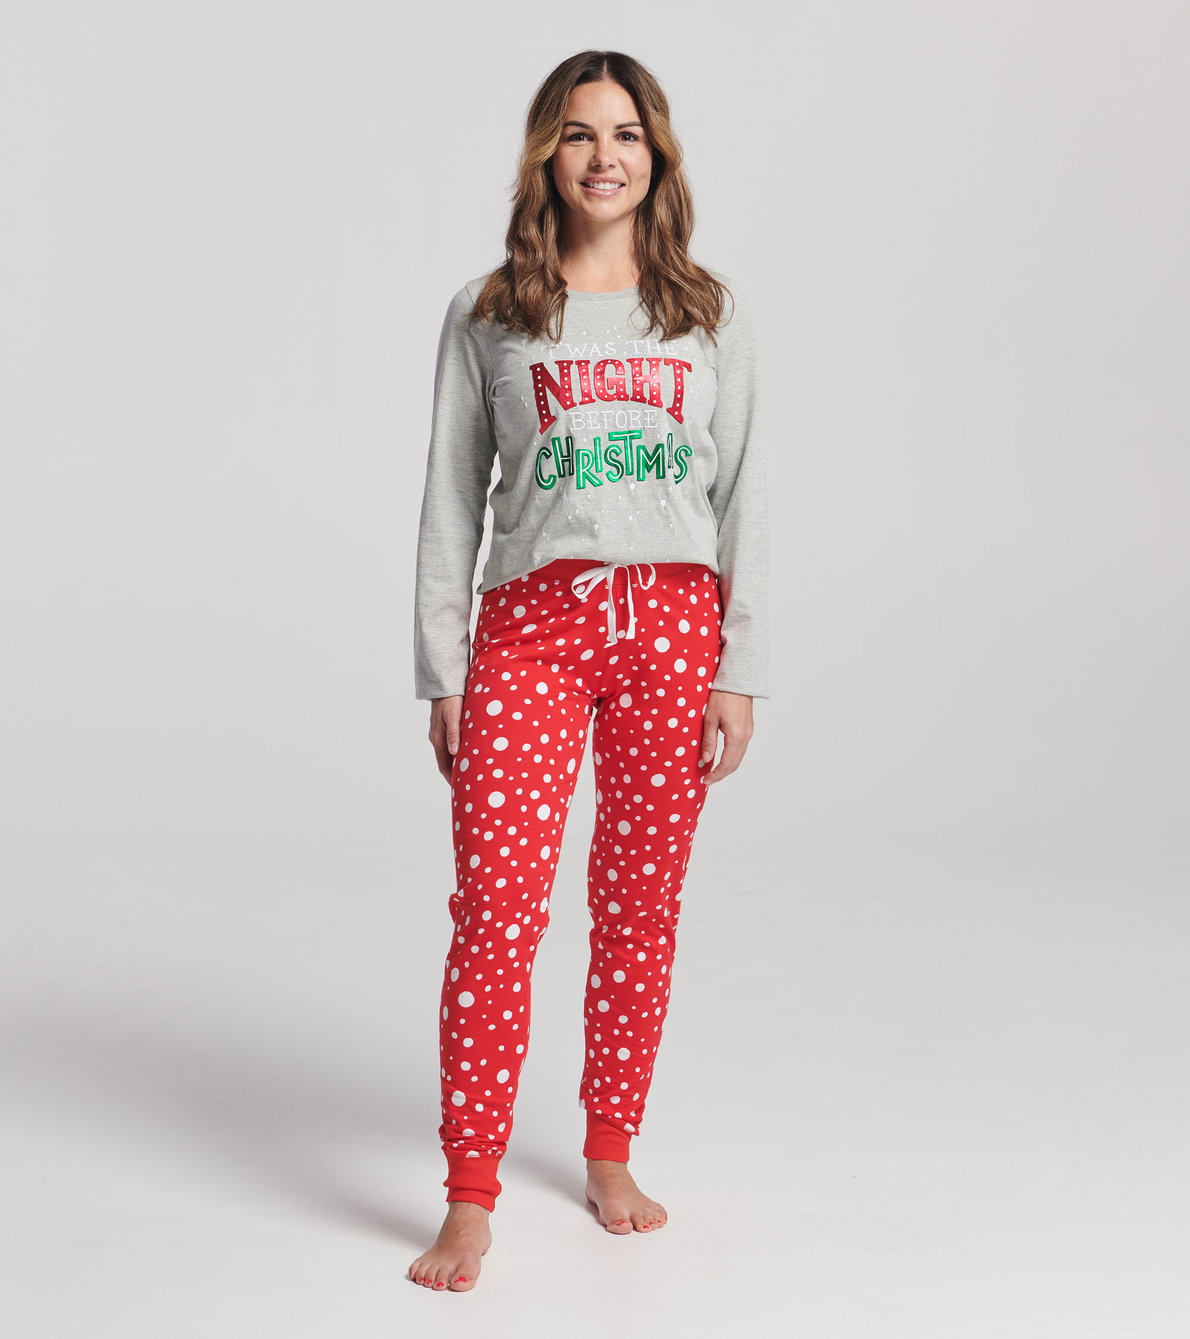 View larger image of Women's Twas The Night Before Christmas Long Sleeve T-Shirt